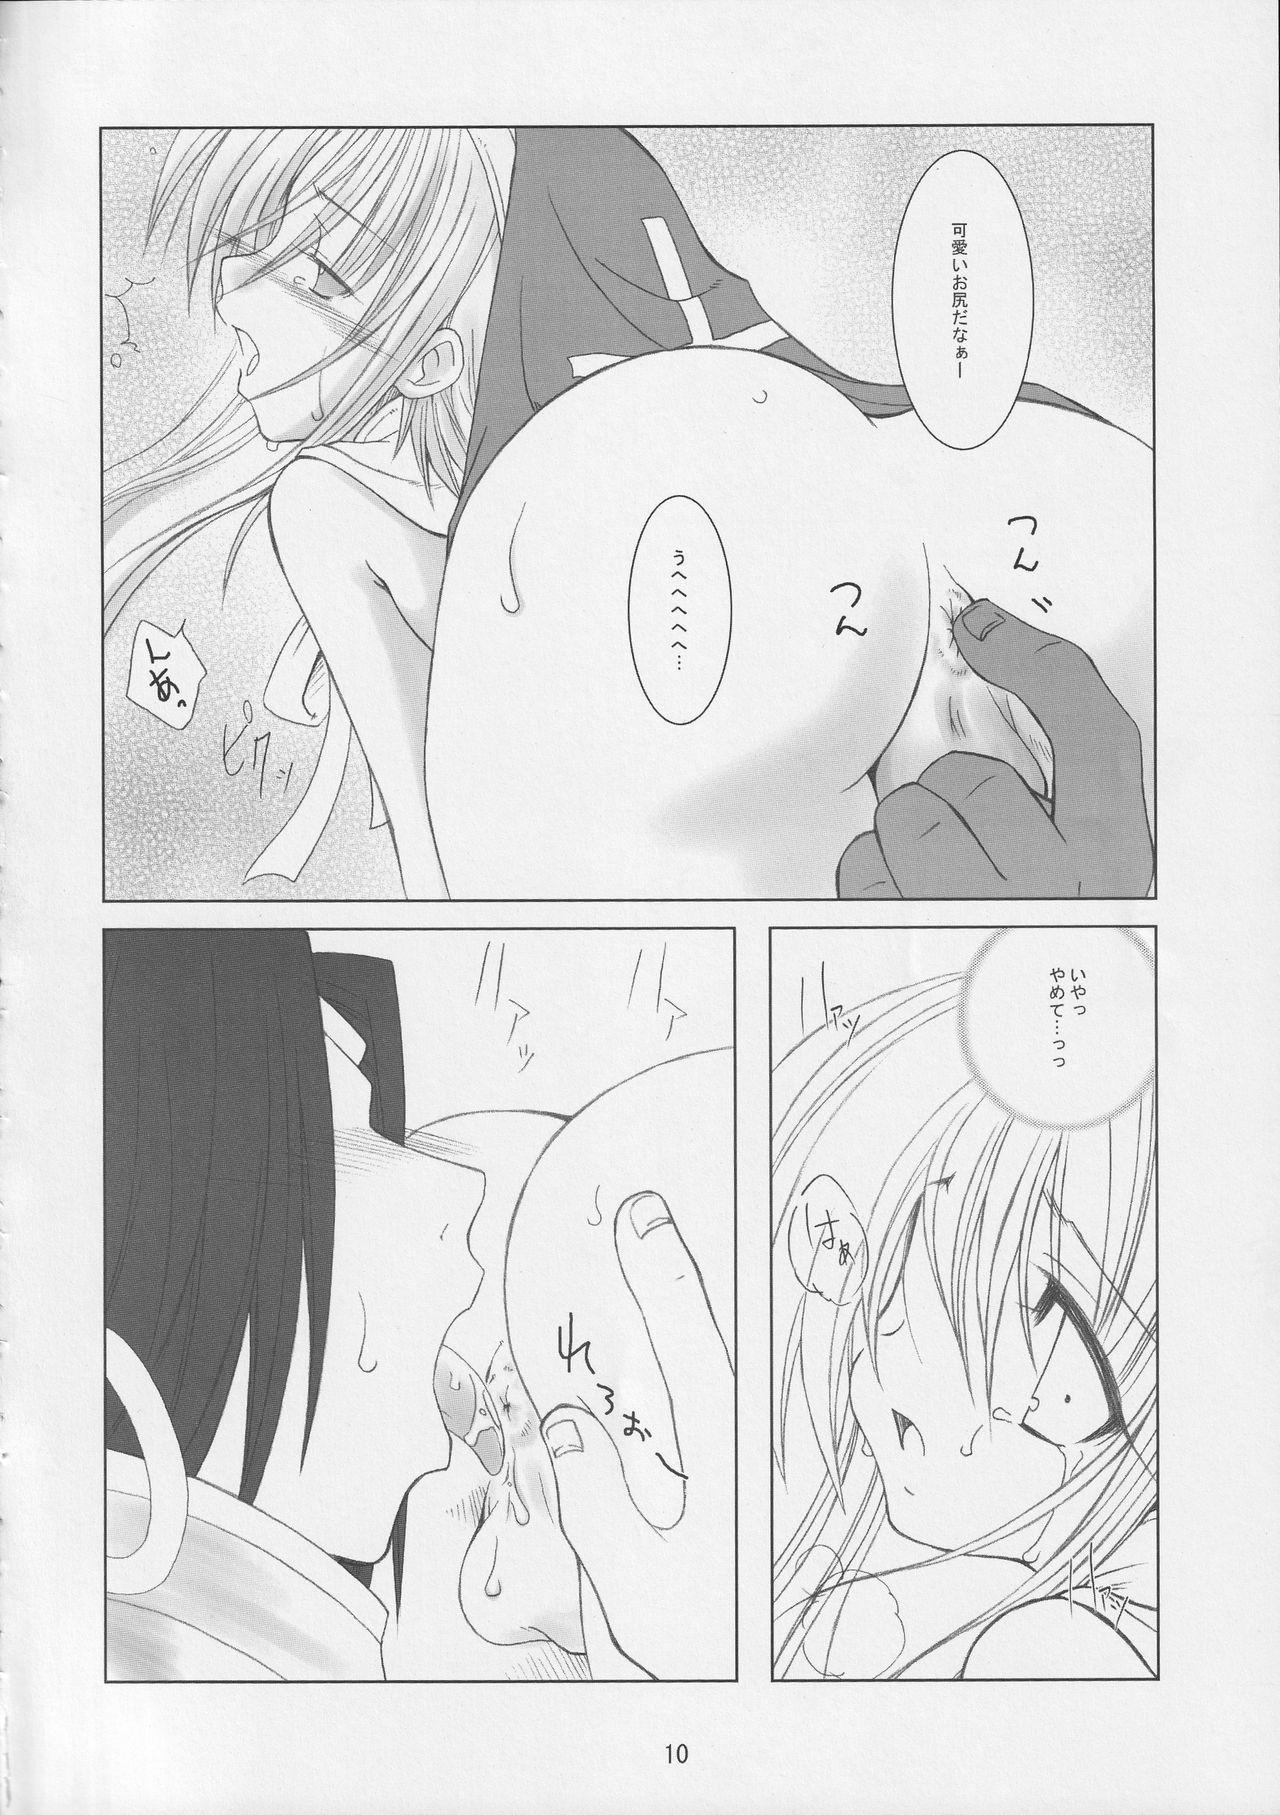 Culo KICK START MY HEART !! - Guilty gear Groupsex - Page 9